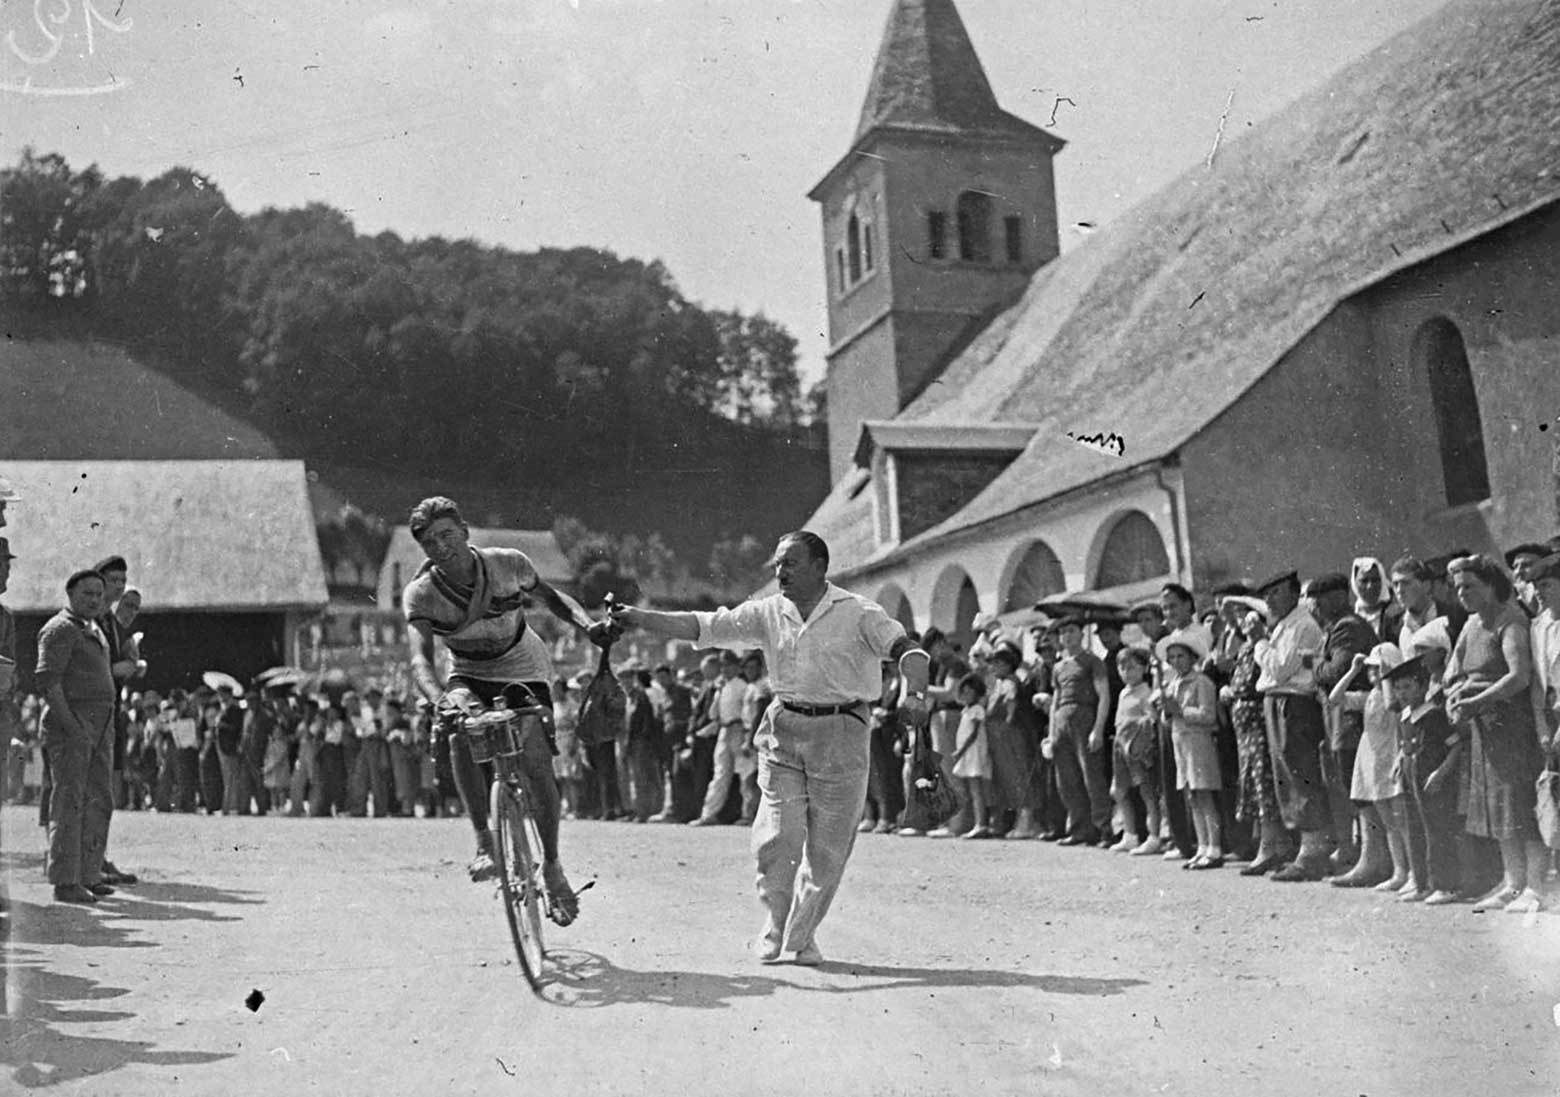 Dutch cyclist Theo Middelkamp receiving a musette during the 8th stage of Tour de France 1938